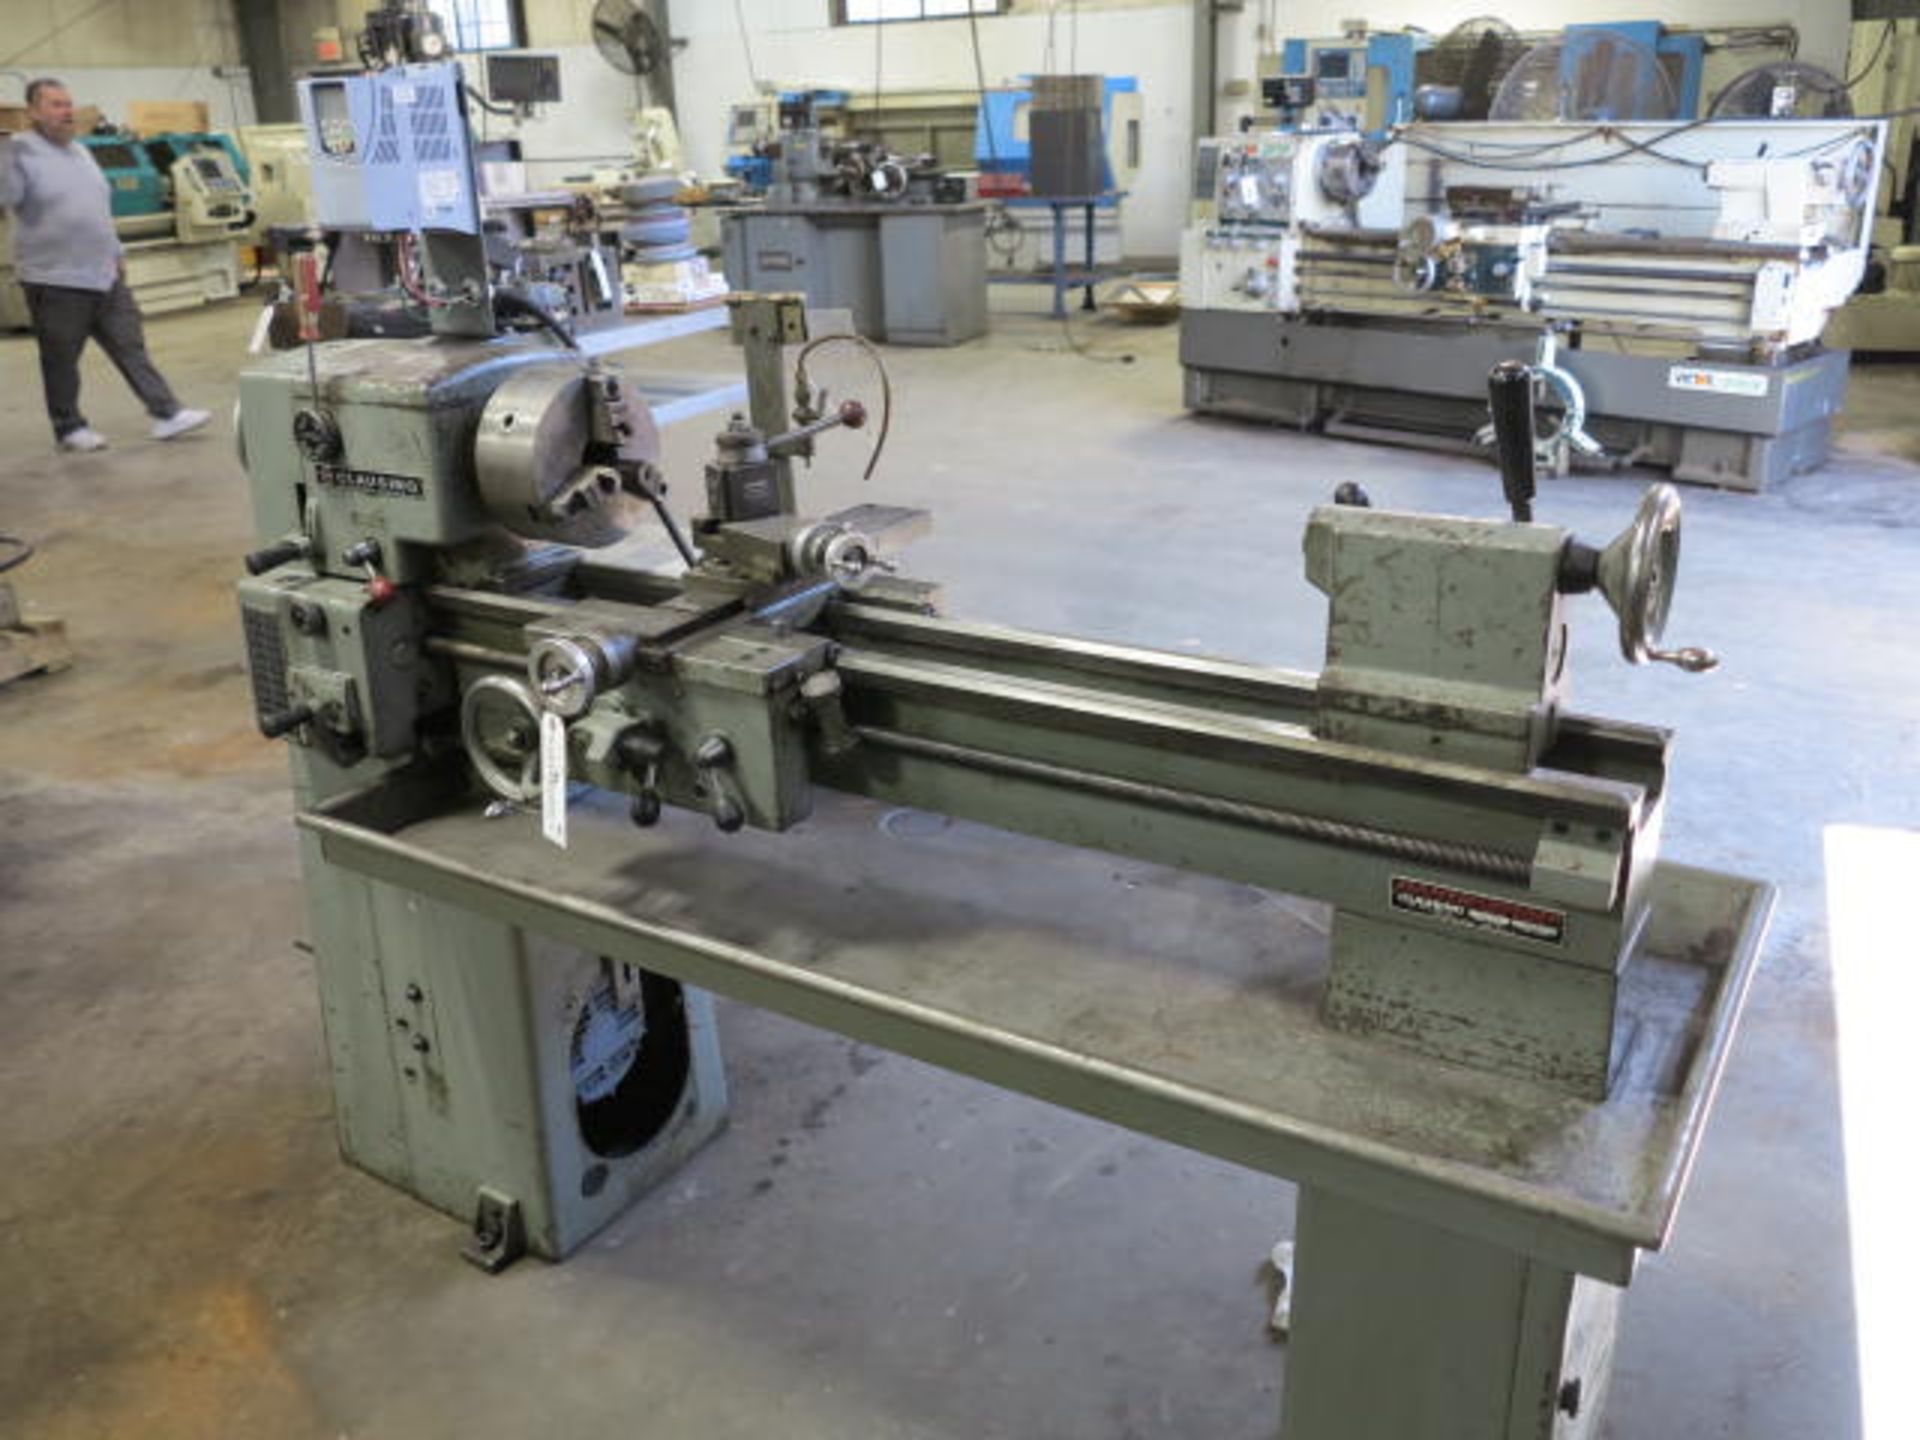 Clausing 12'' x 36'' Lathe Model 5014, S/N 501304, 8'' Chuck, Variable Speed Spindle, 52-2000 RPM